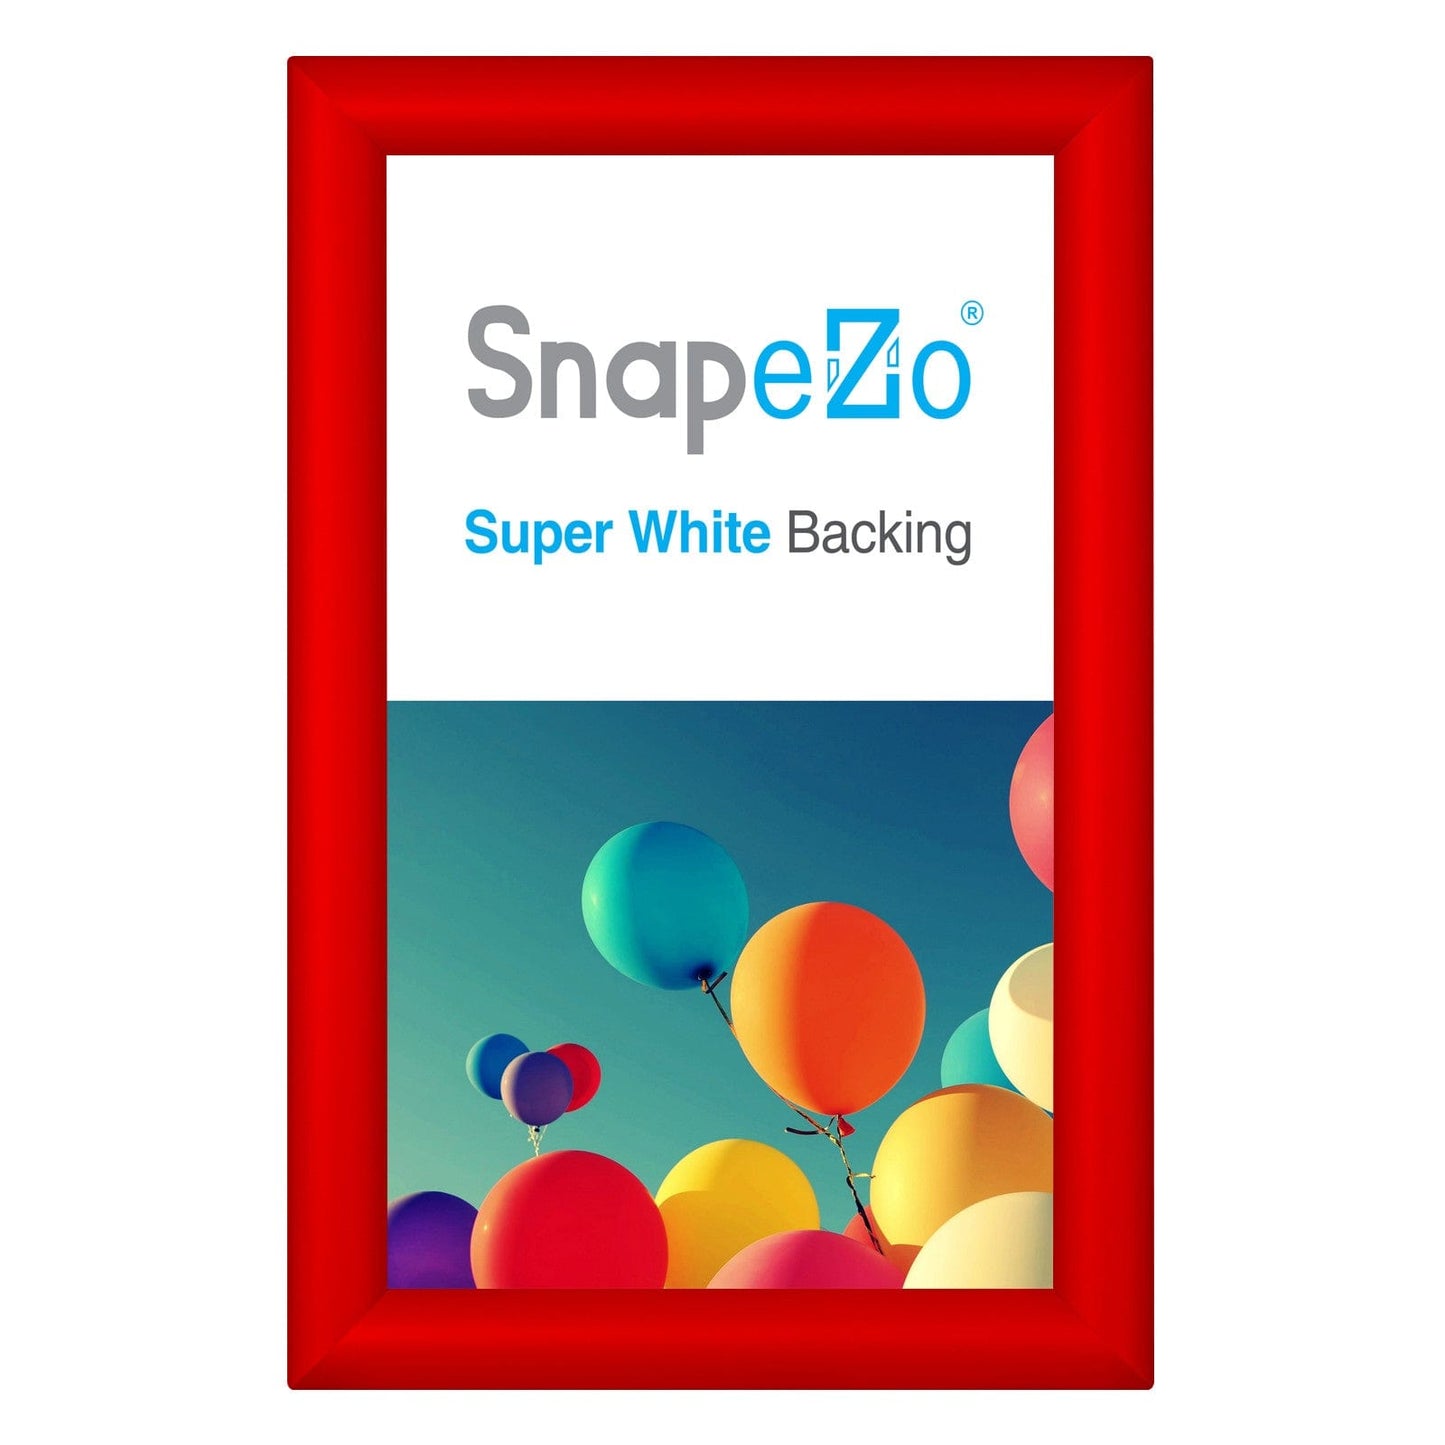 8.5x14 Red SnapeZo® Snap Frame - 1.2" Profile - Snap Frames Direct